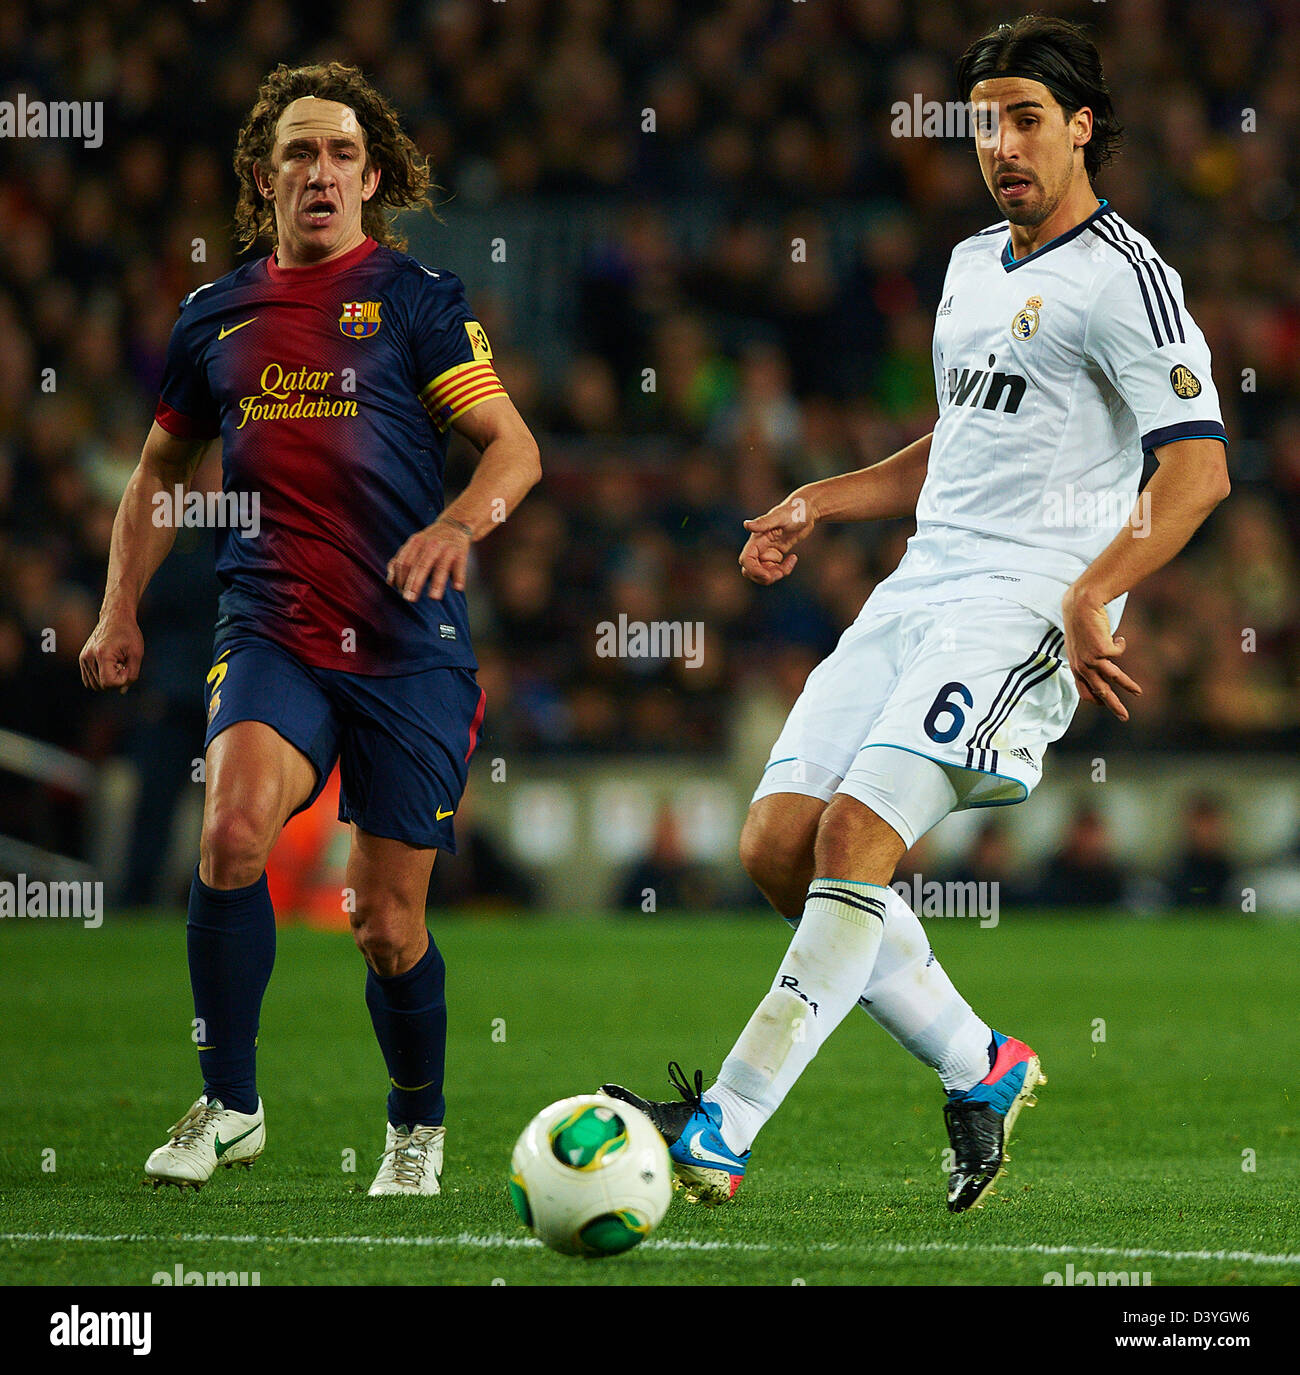 Barcelona, Spain. 26th February 2013. Carles Puyol (FC Barcelona) duels for the ball against Sami Khedira (Real Madrid CF), during Kings Cup soccer match between FC Barcelona and Real Madrid CF, at the Camp Nou stadium in Barcelona, Spain, tuesday, February 26, 2013. Foto: S.Lau/dpa/Alamy Live News Stock Photo